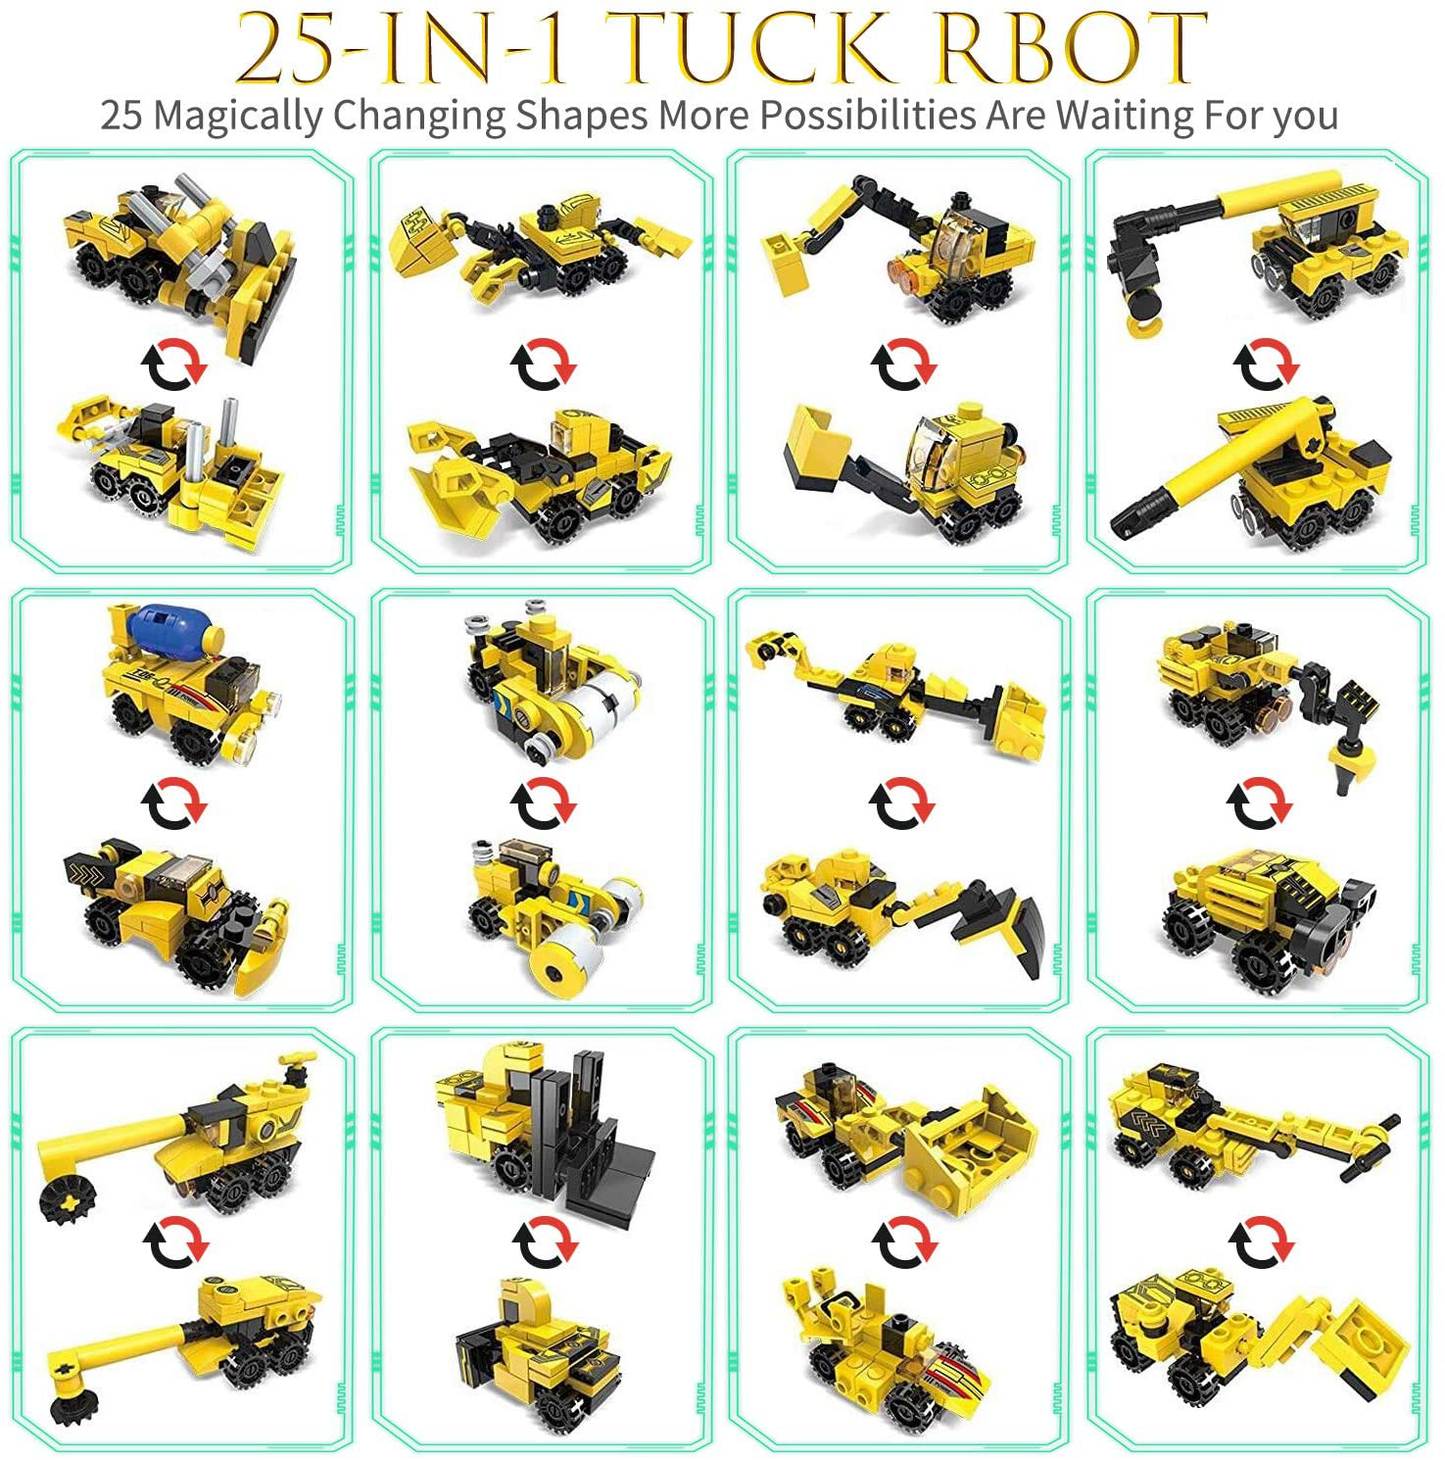 GARUNK Construction Vehicle Building Kit 669 Pcs, with 12 Kinds of Building Vehicle as Excavator, Crane, Mixer, Roadheader, Roller Ect, Combine 12 Vehicles to a Big Robot, Architect Pretend Play Toys